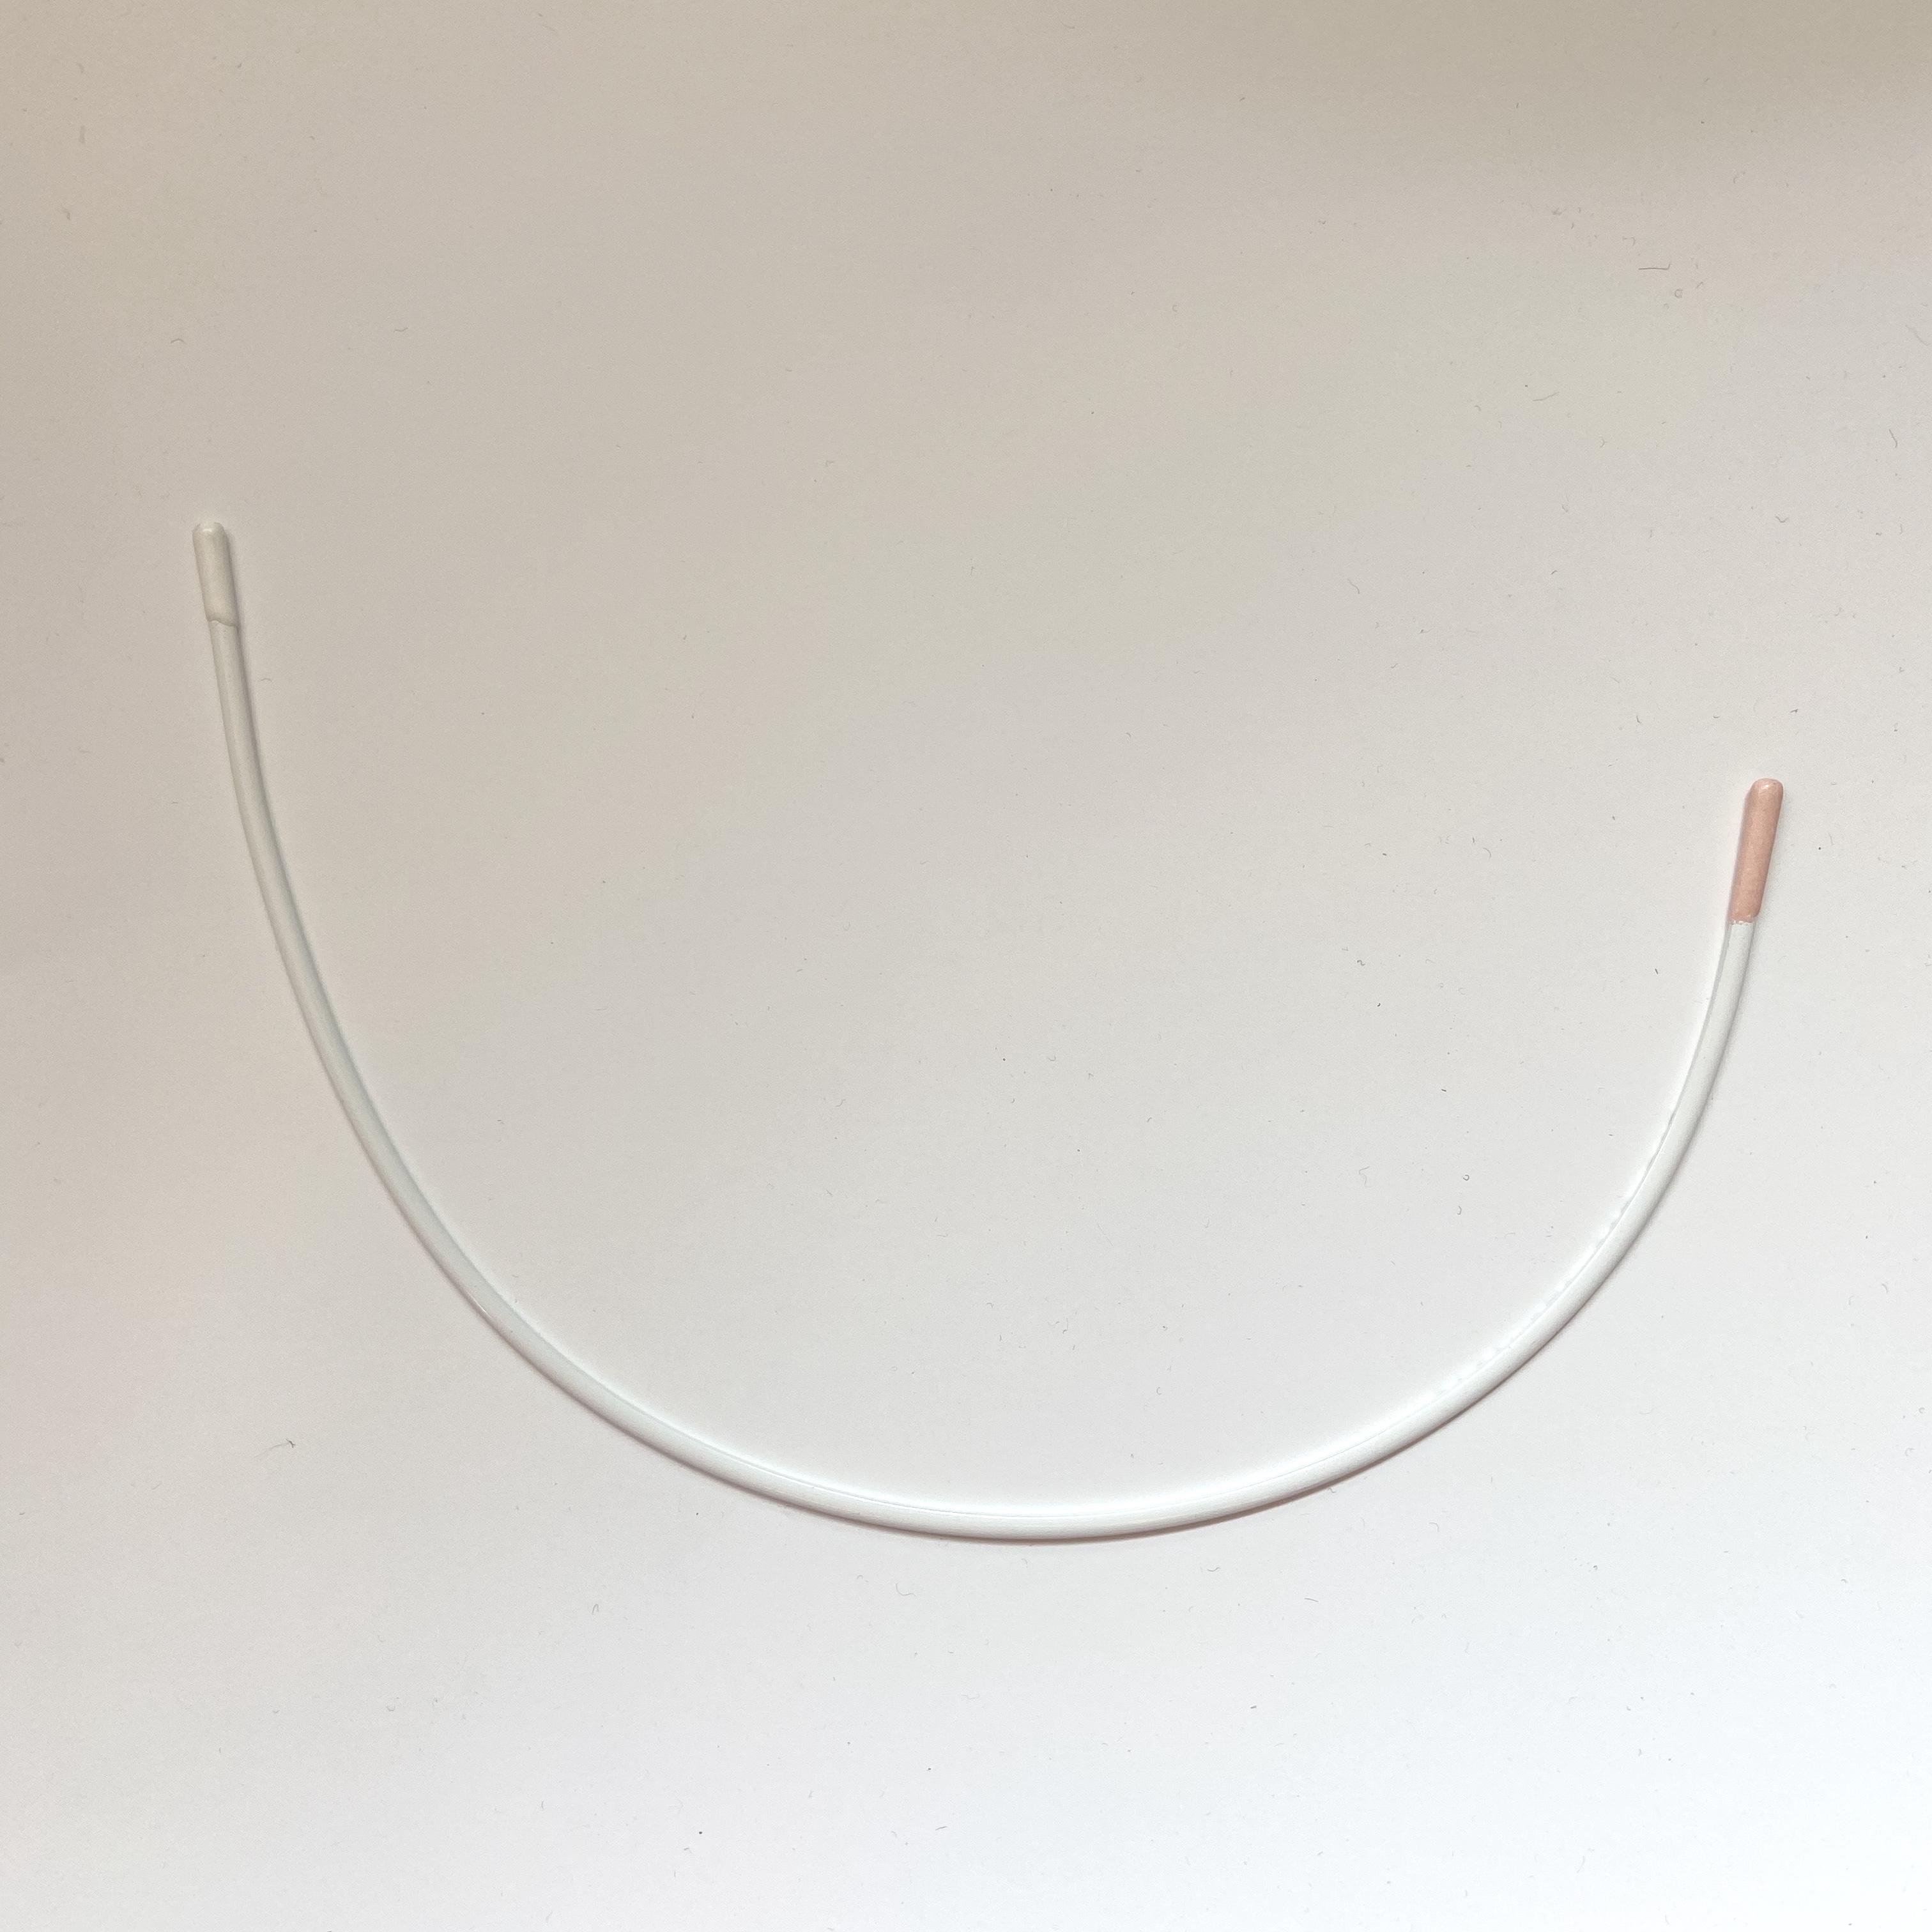 Bra Wires - Fully coated - style 20 (Balcony), per pair